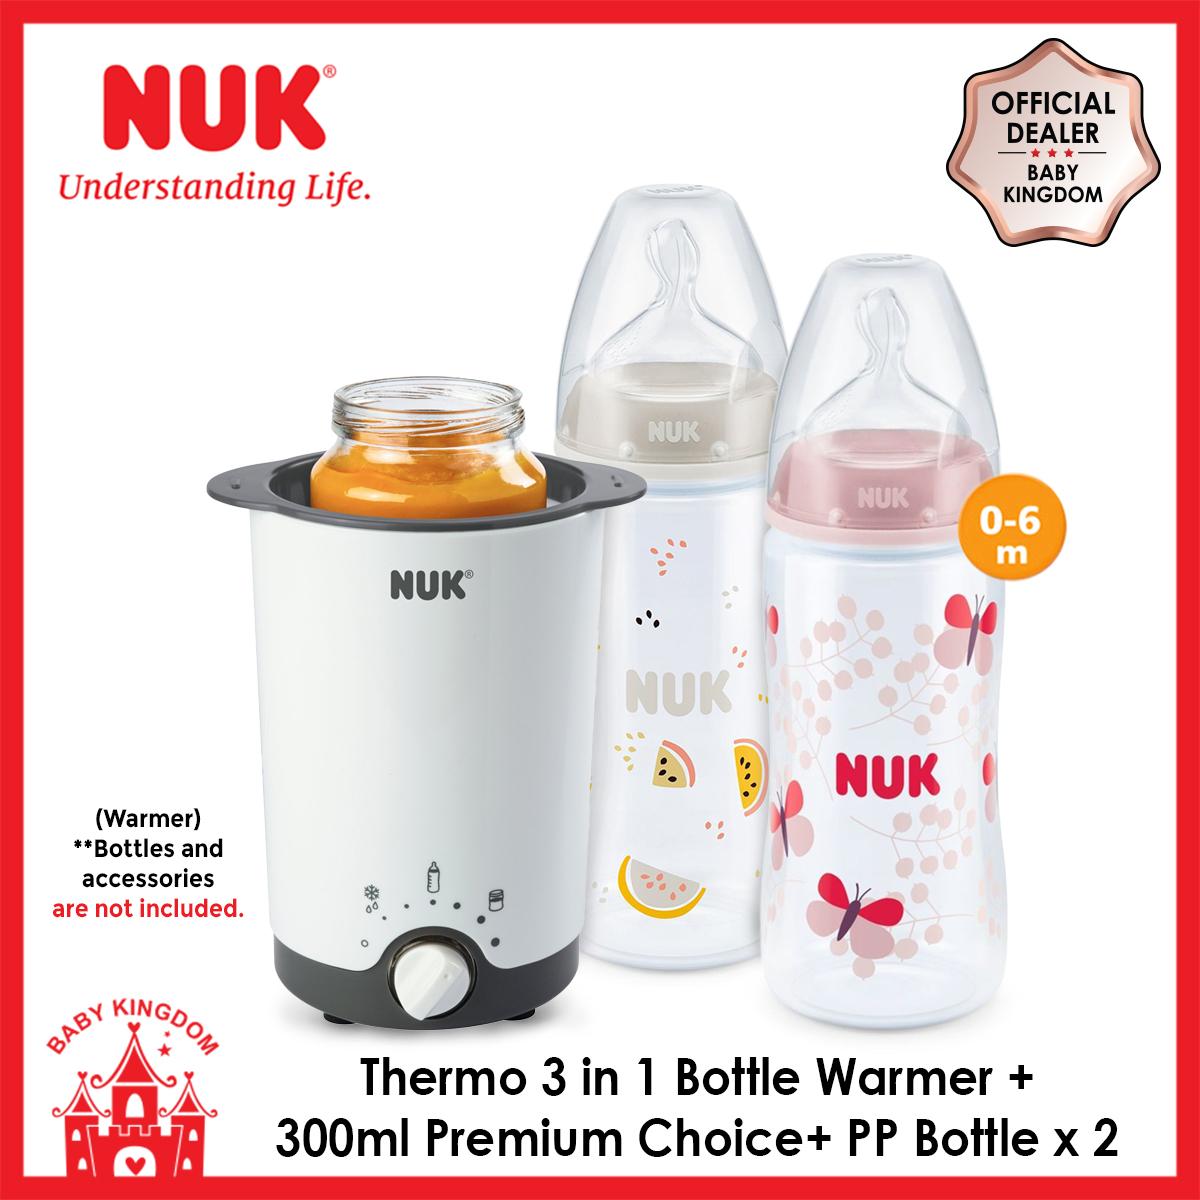 nuk thermo express bottle warmer